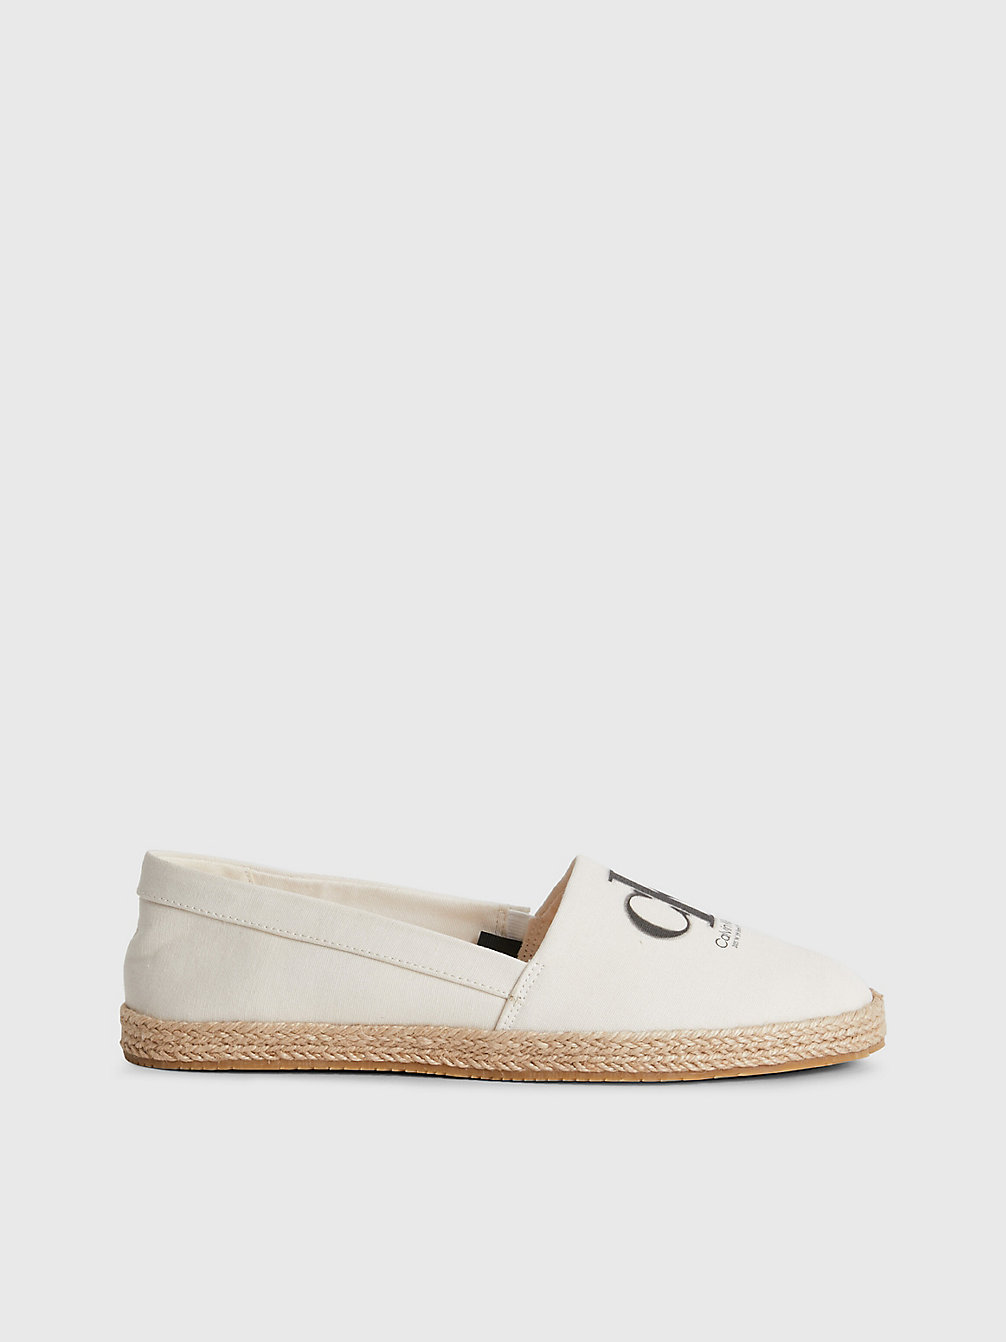 ANCIENT WHITE Recycled Canvas Espadrilles undefined women Calvin Klein